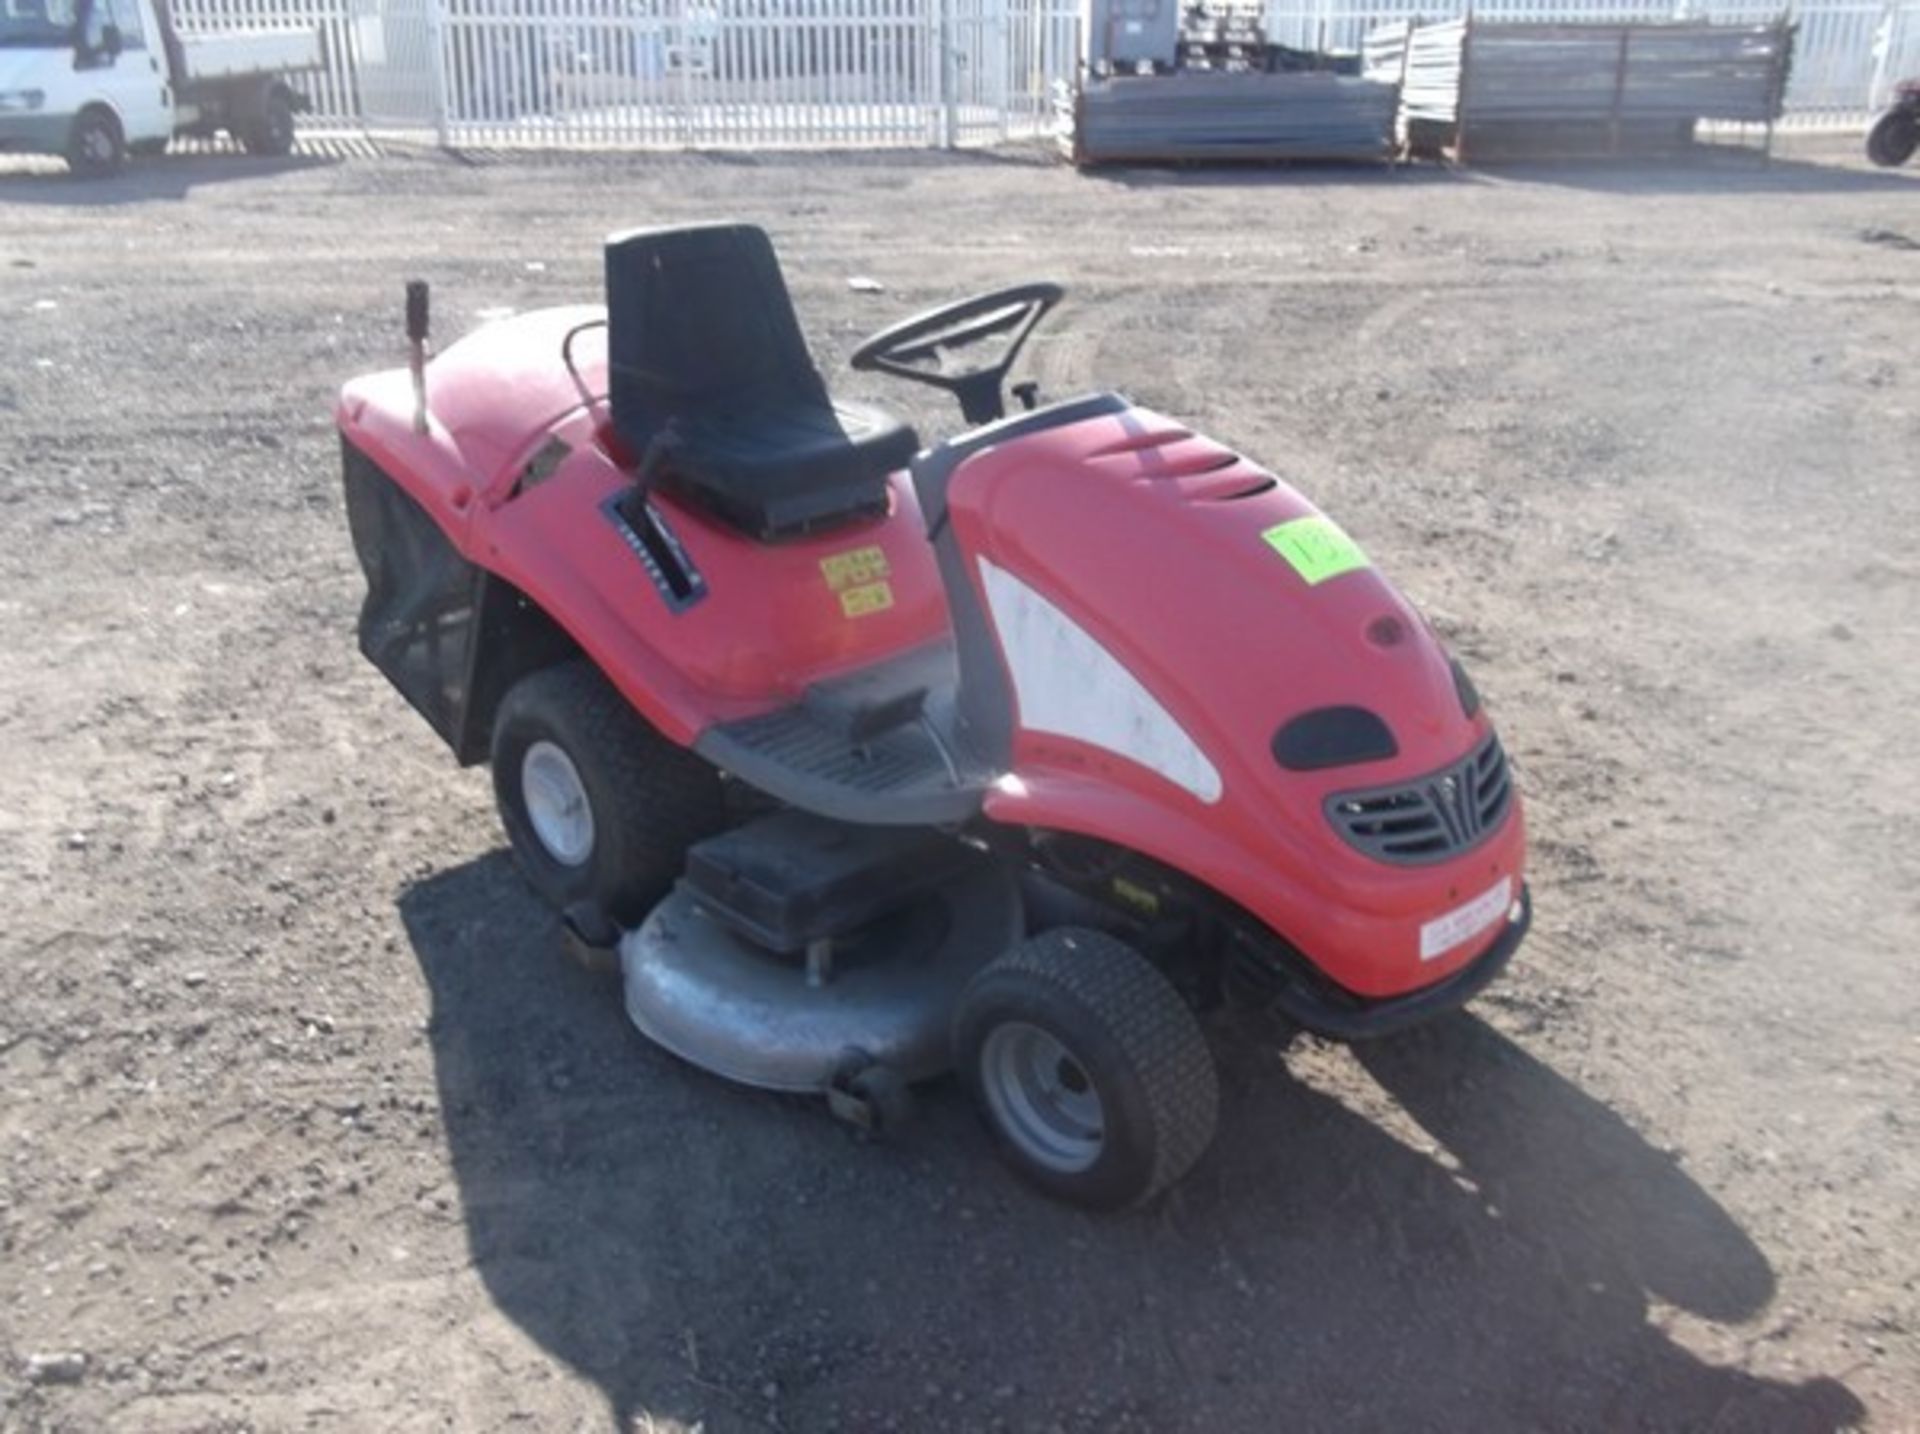 RIDE ON MOWER AG122/18H 48" DECK. HYDROSTATIC DRIVE, 18HPV TWIN BRIGGS & STRATTON ENGINE - Image 2 of 5